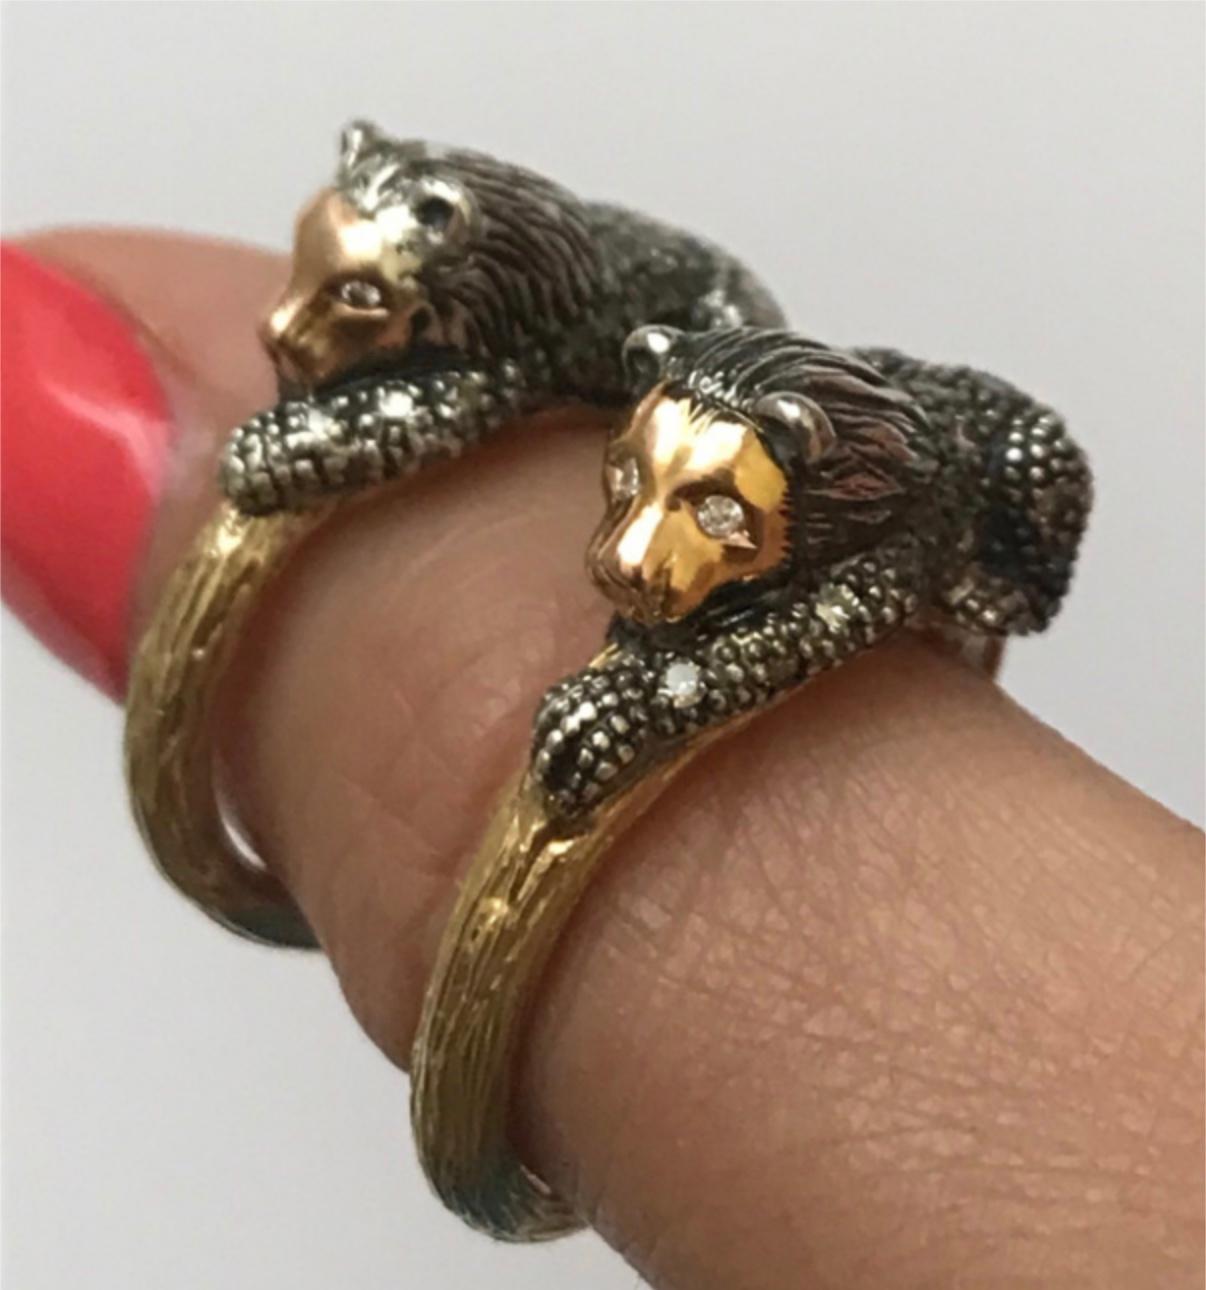 Set with a regal lion, who signifies protection, the Animal Lion Stackable Ring can be worn alone, or stacked with others in Bibi’s collection. The textured ring is fashioned in 18k yellow gold to resemble a branch, while the lion is in blackened